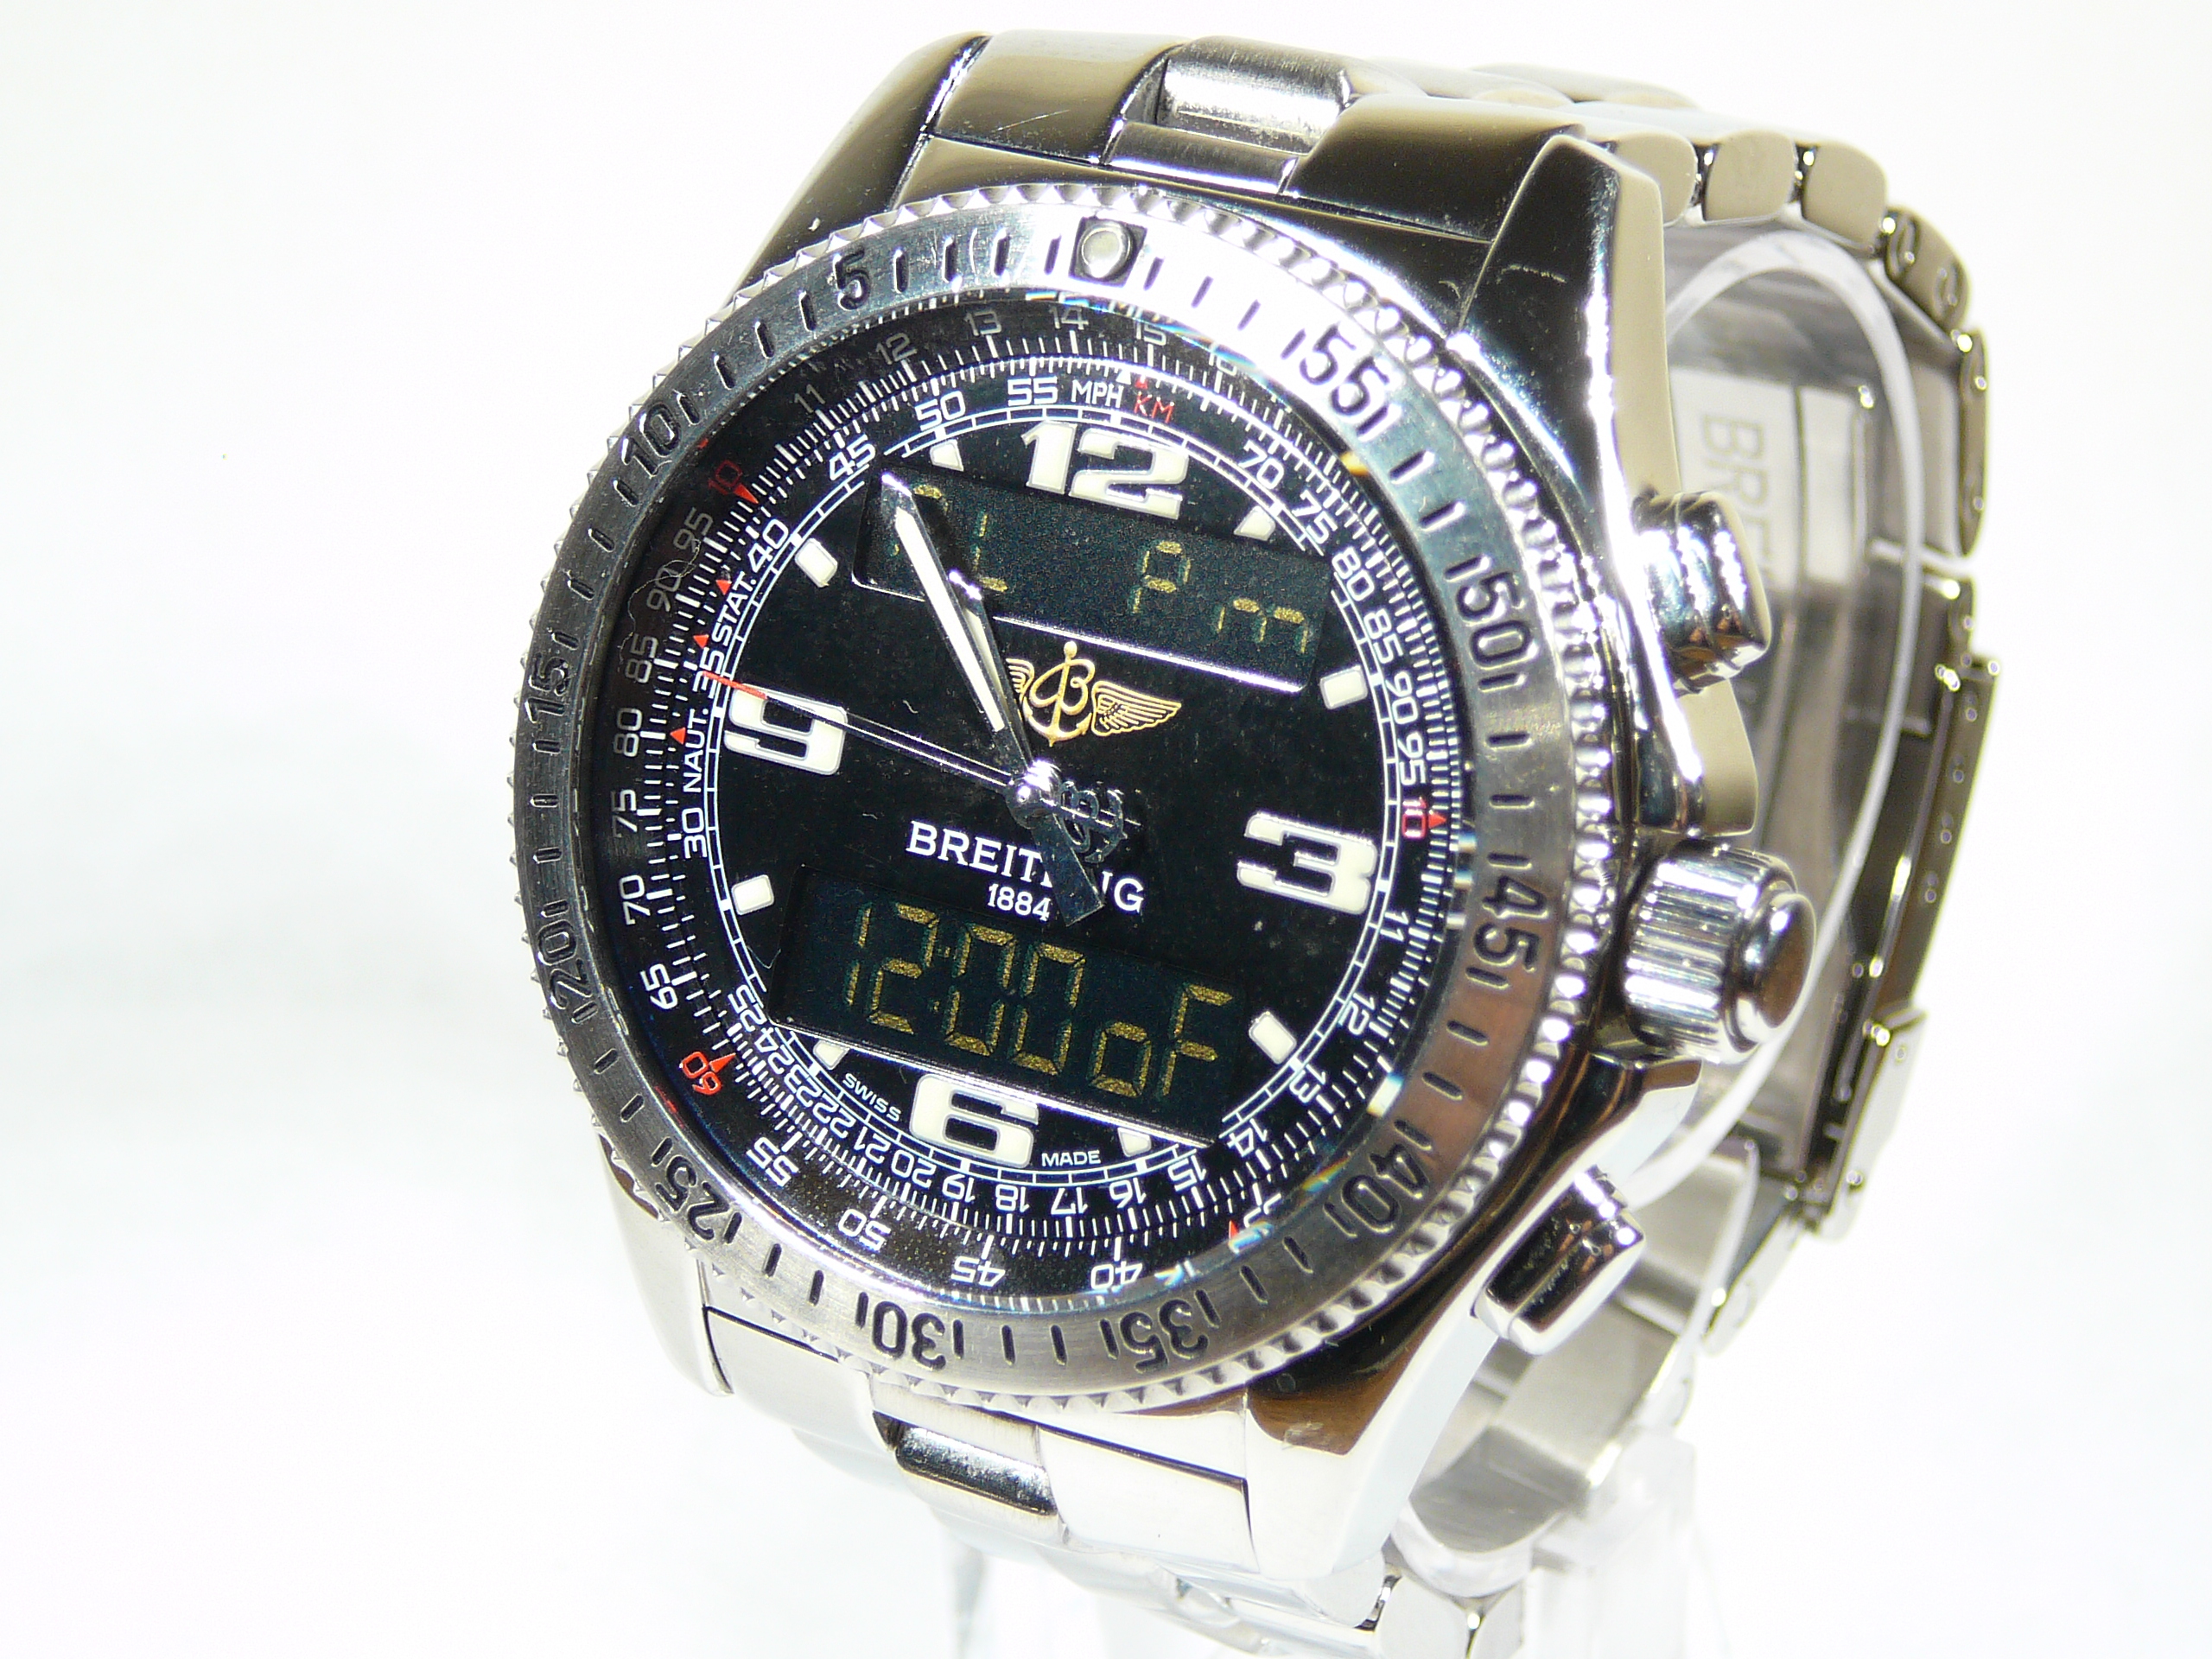 Gents Breitling Wrist Watch - Image 2 of 3